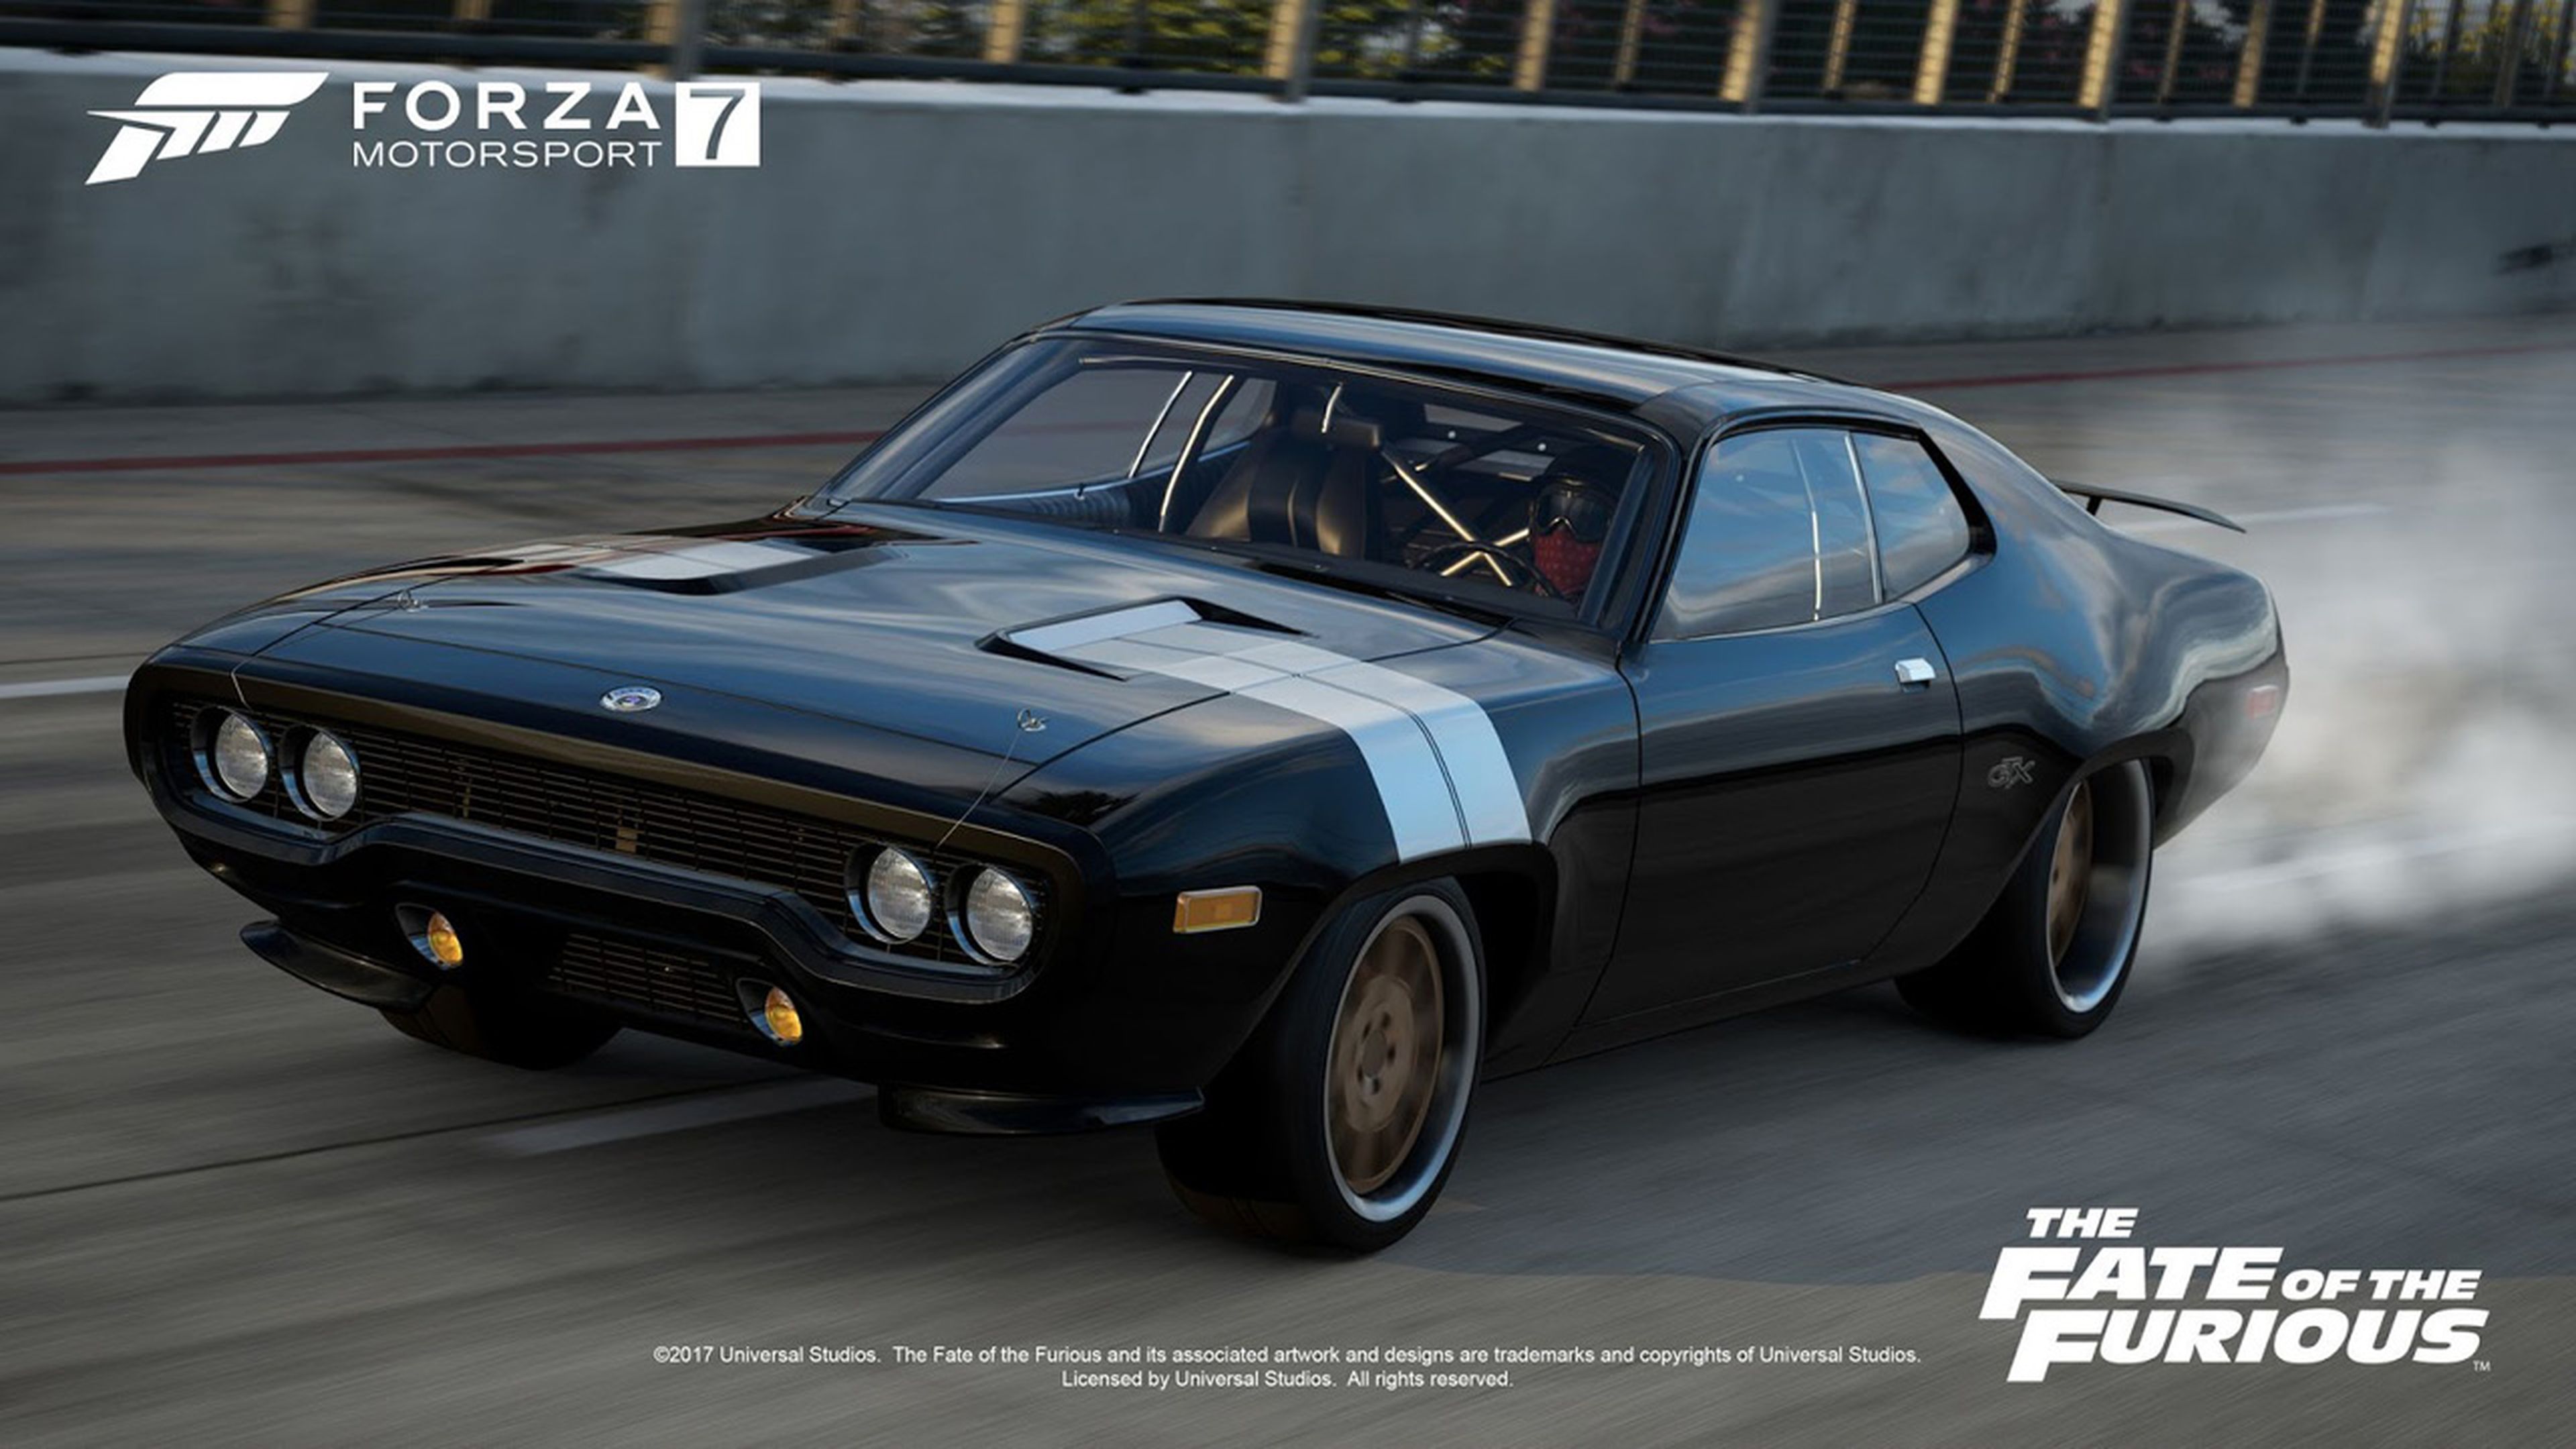 Forza Motorsport 7: coches de Fast & Furious 8